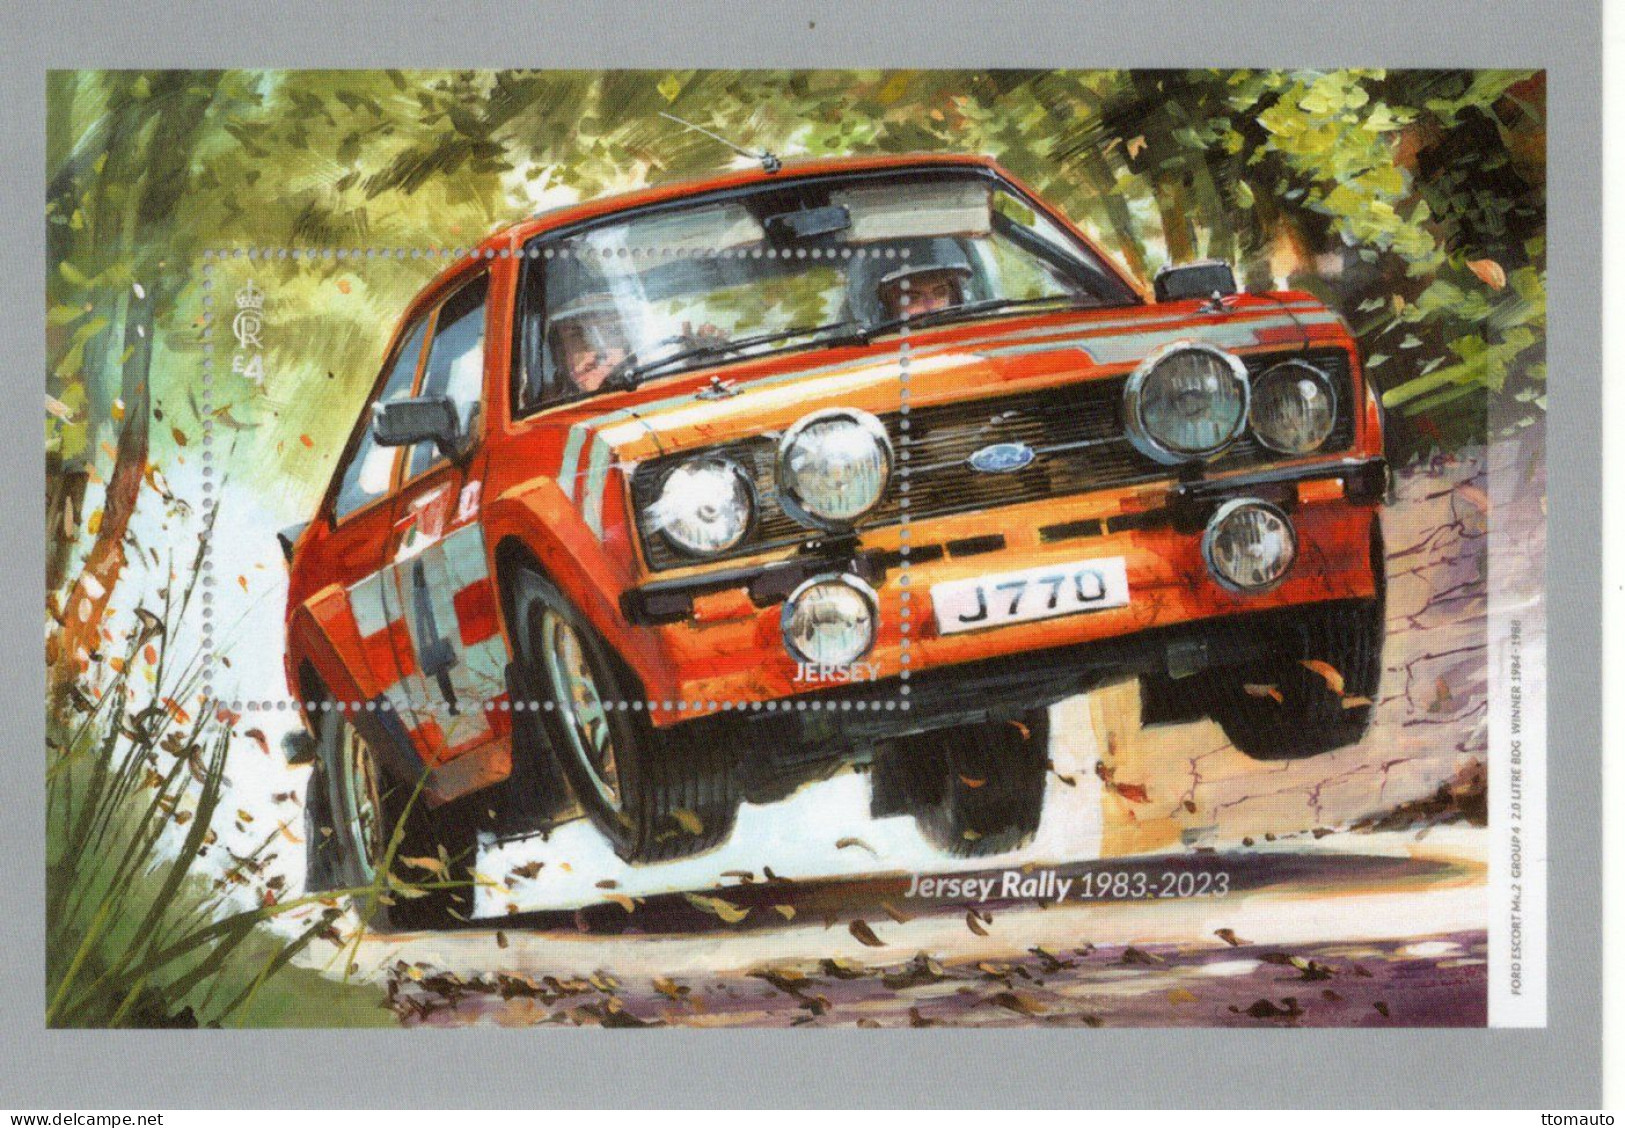 Ford Escort RS1800 -  40 Years Of Jersey Rally - Jersey PHQ Postcard - Rallyes